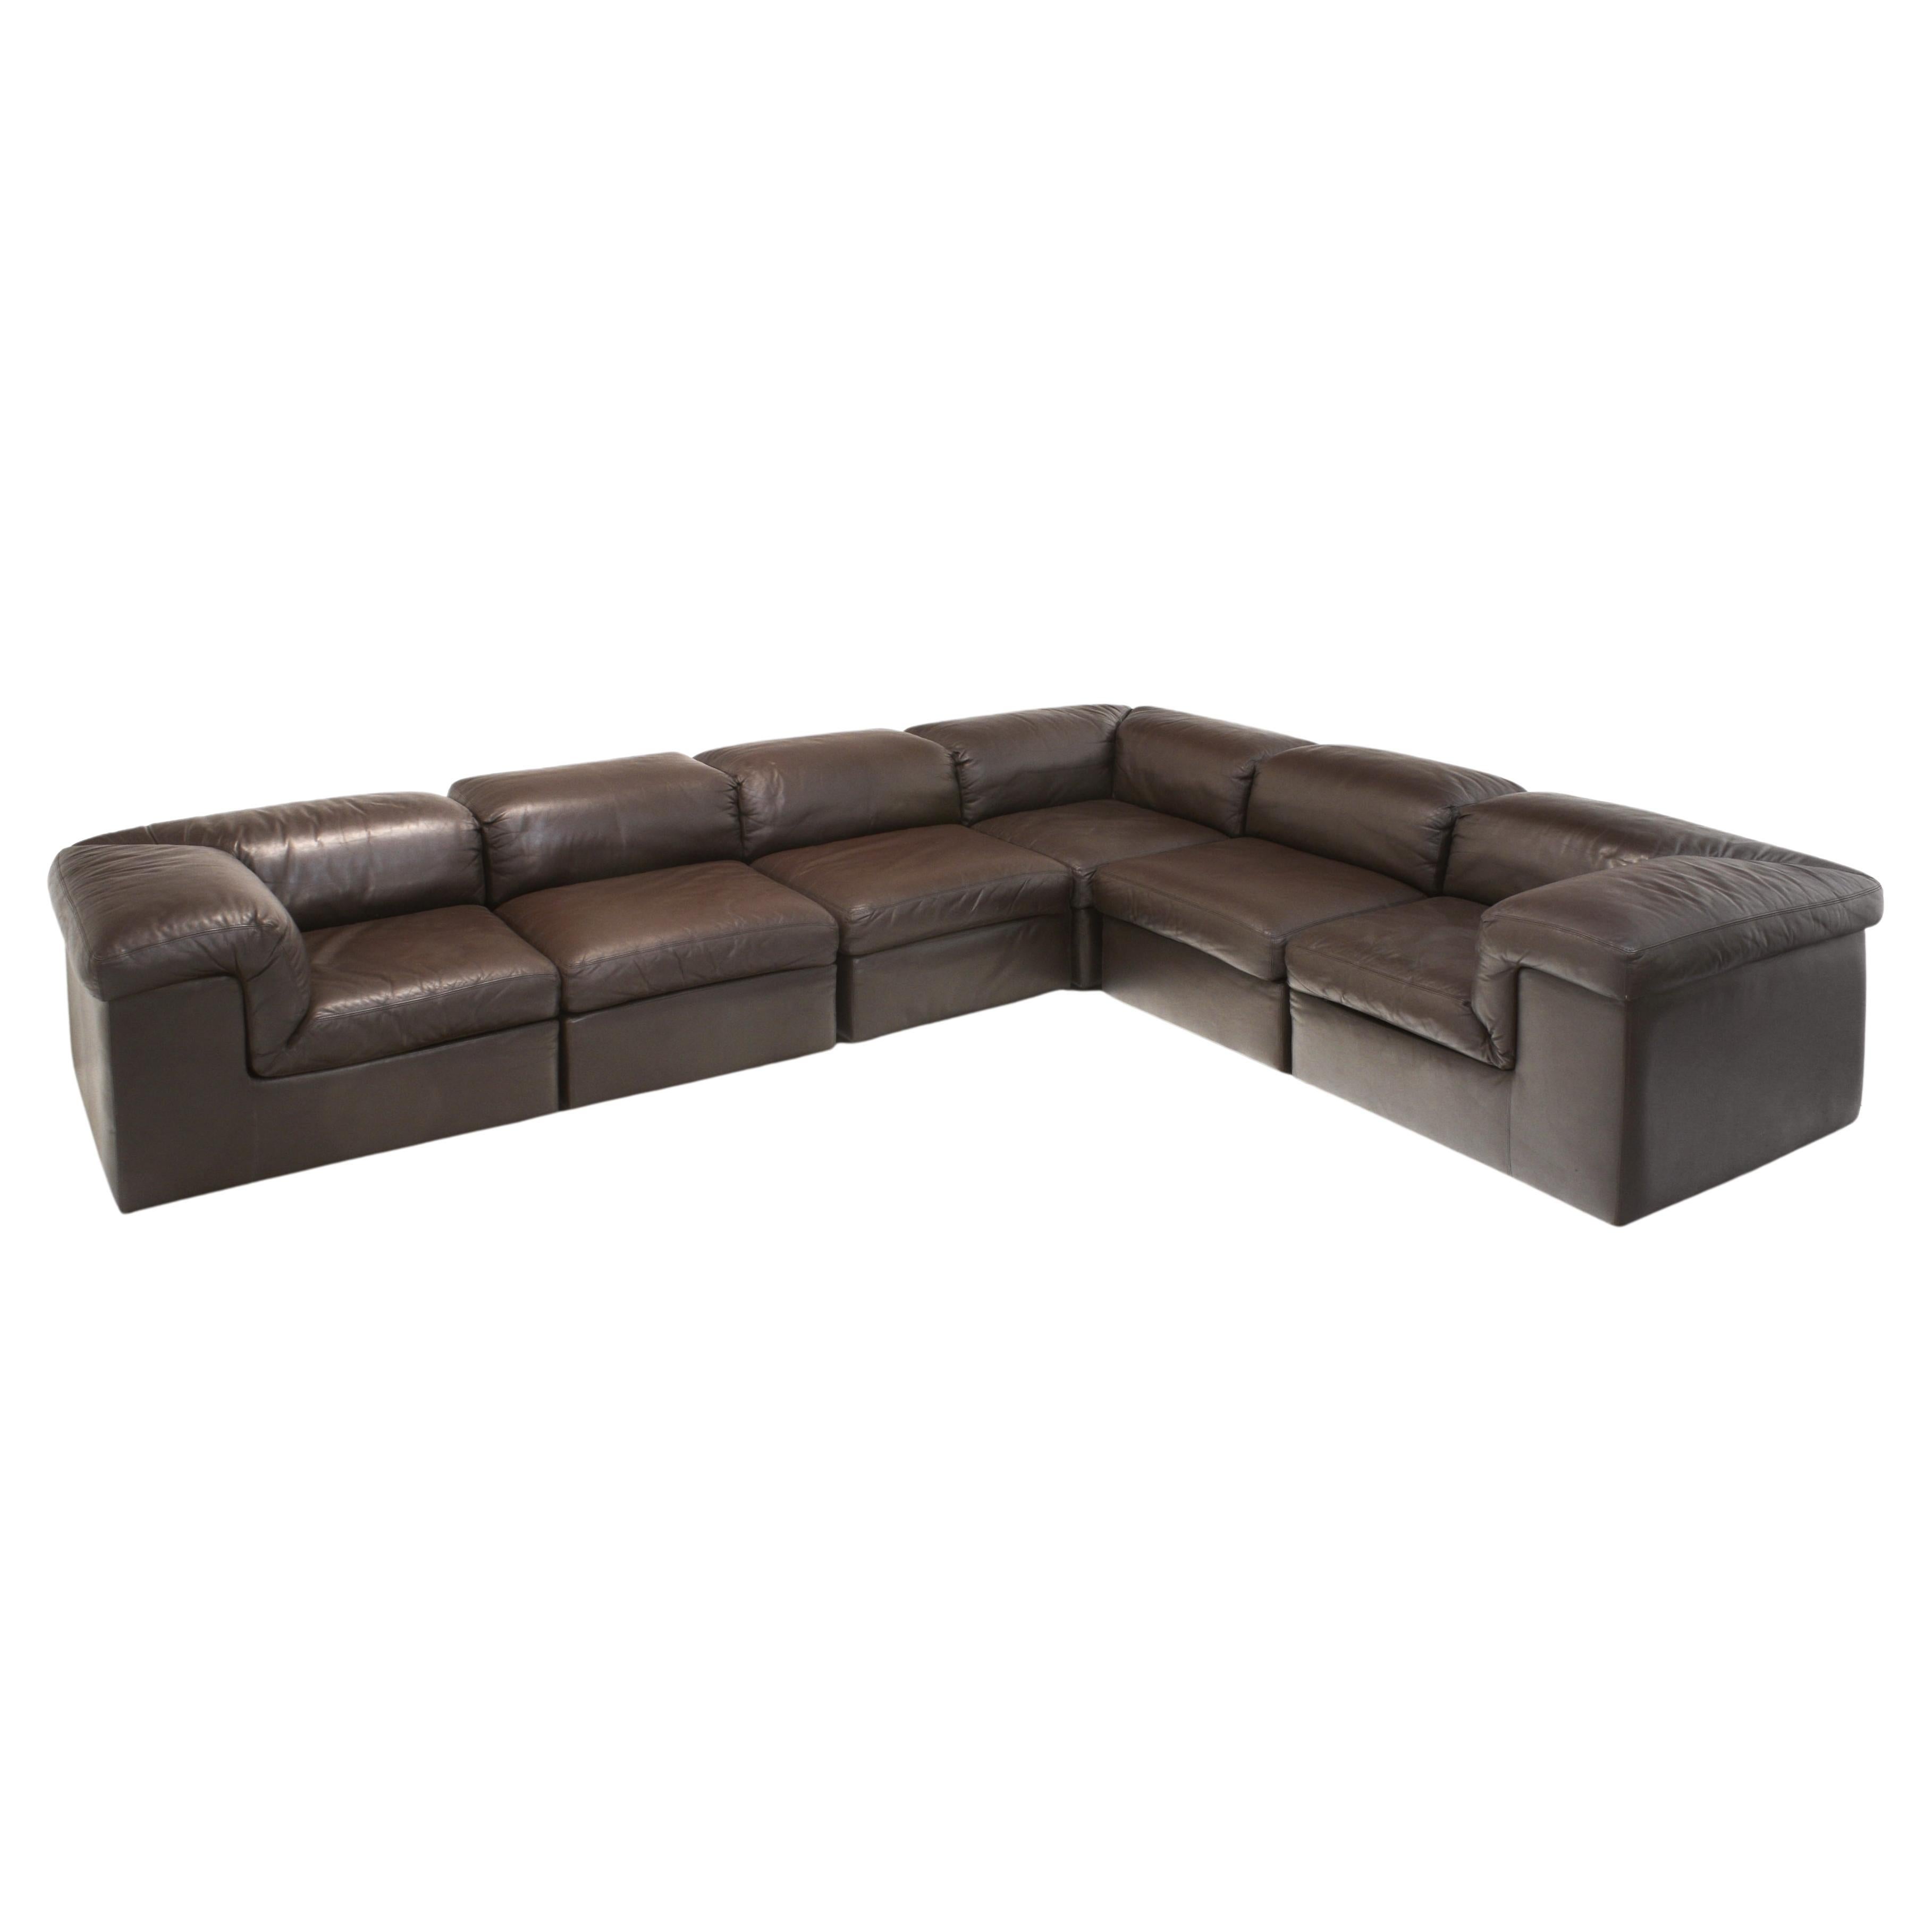 Modular Brown Leather Jeep Sectional Sofa by Anita Schmidt for Durlet, 1970s For Sale